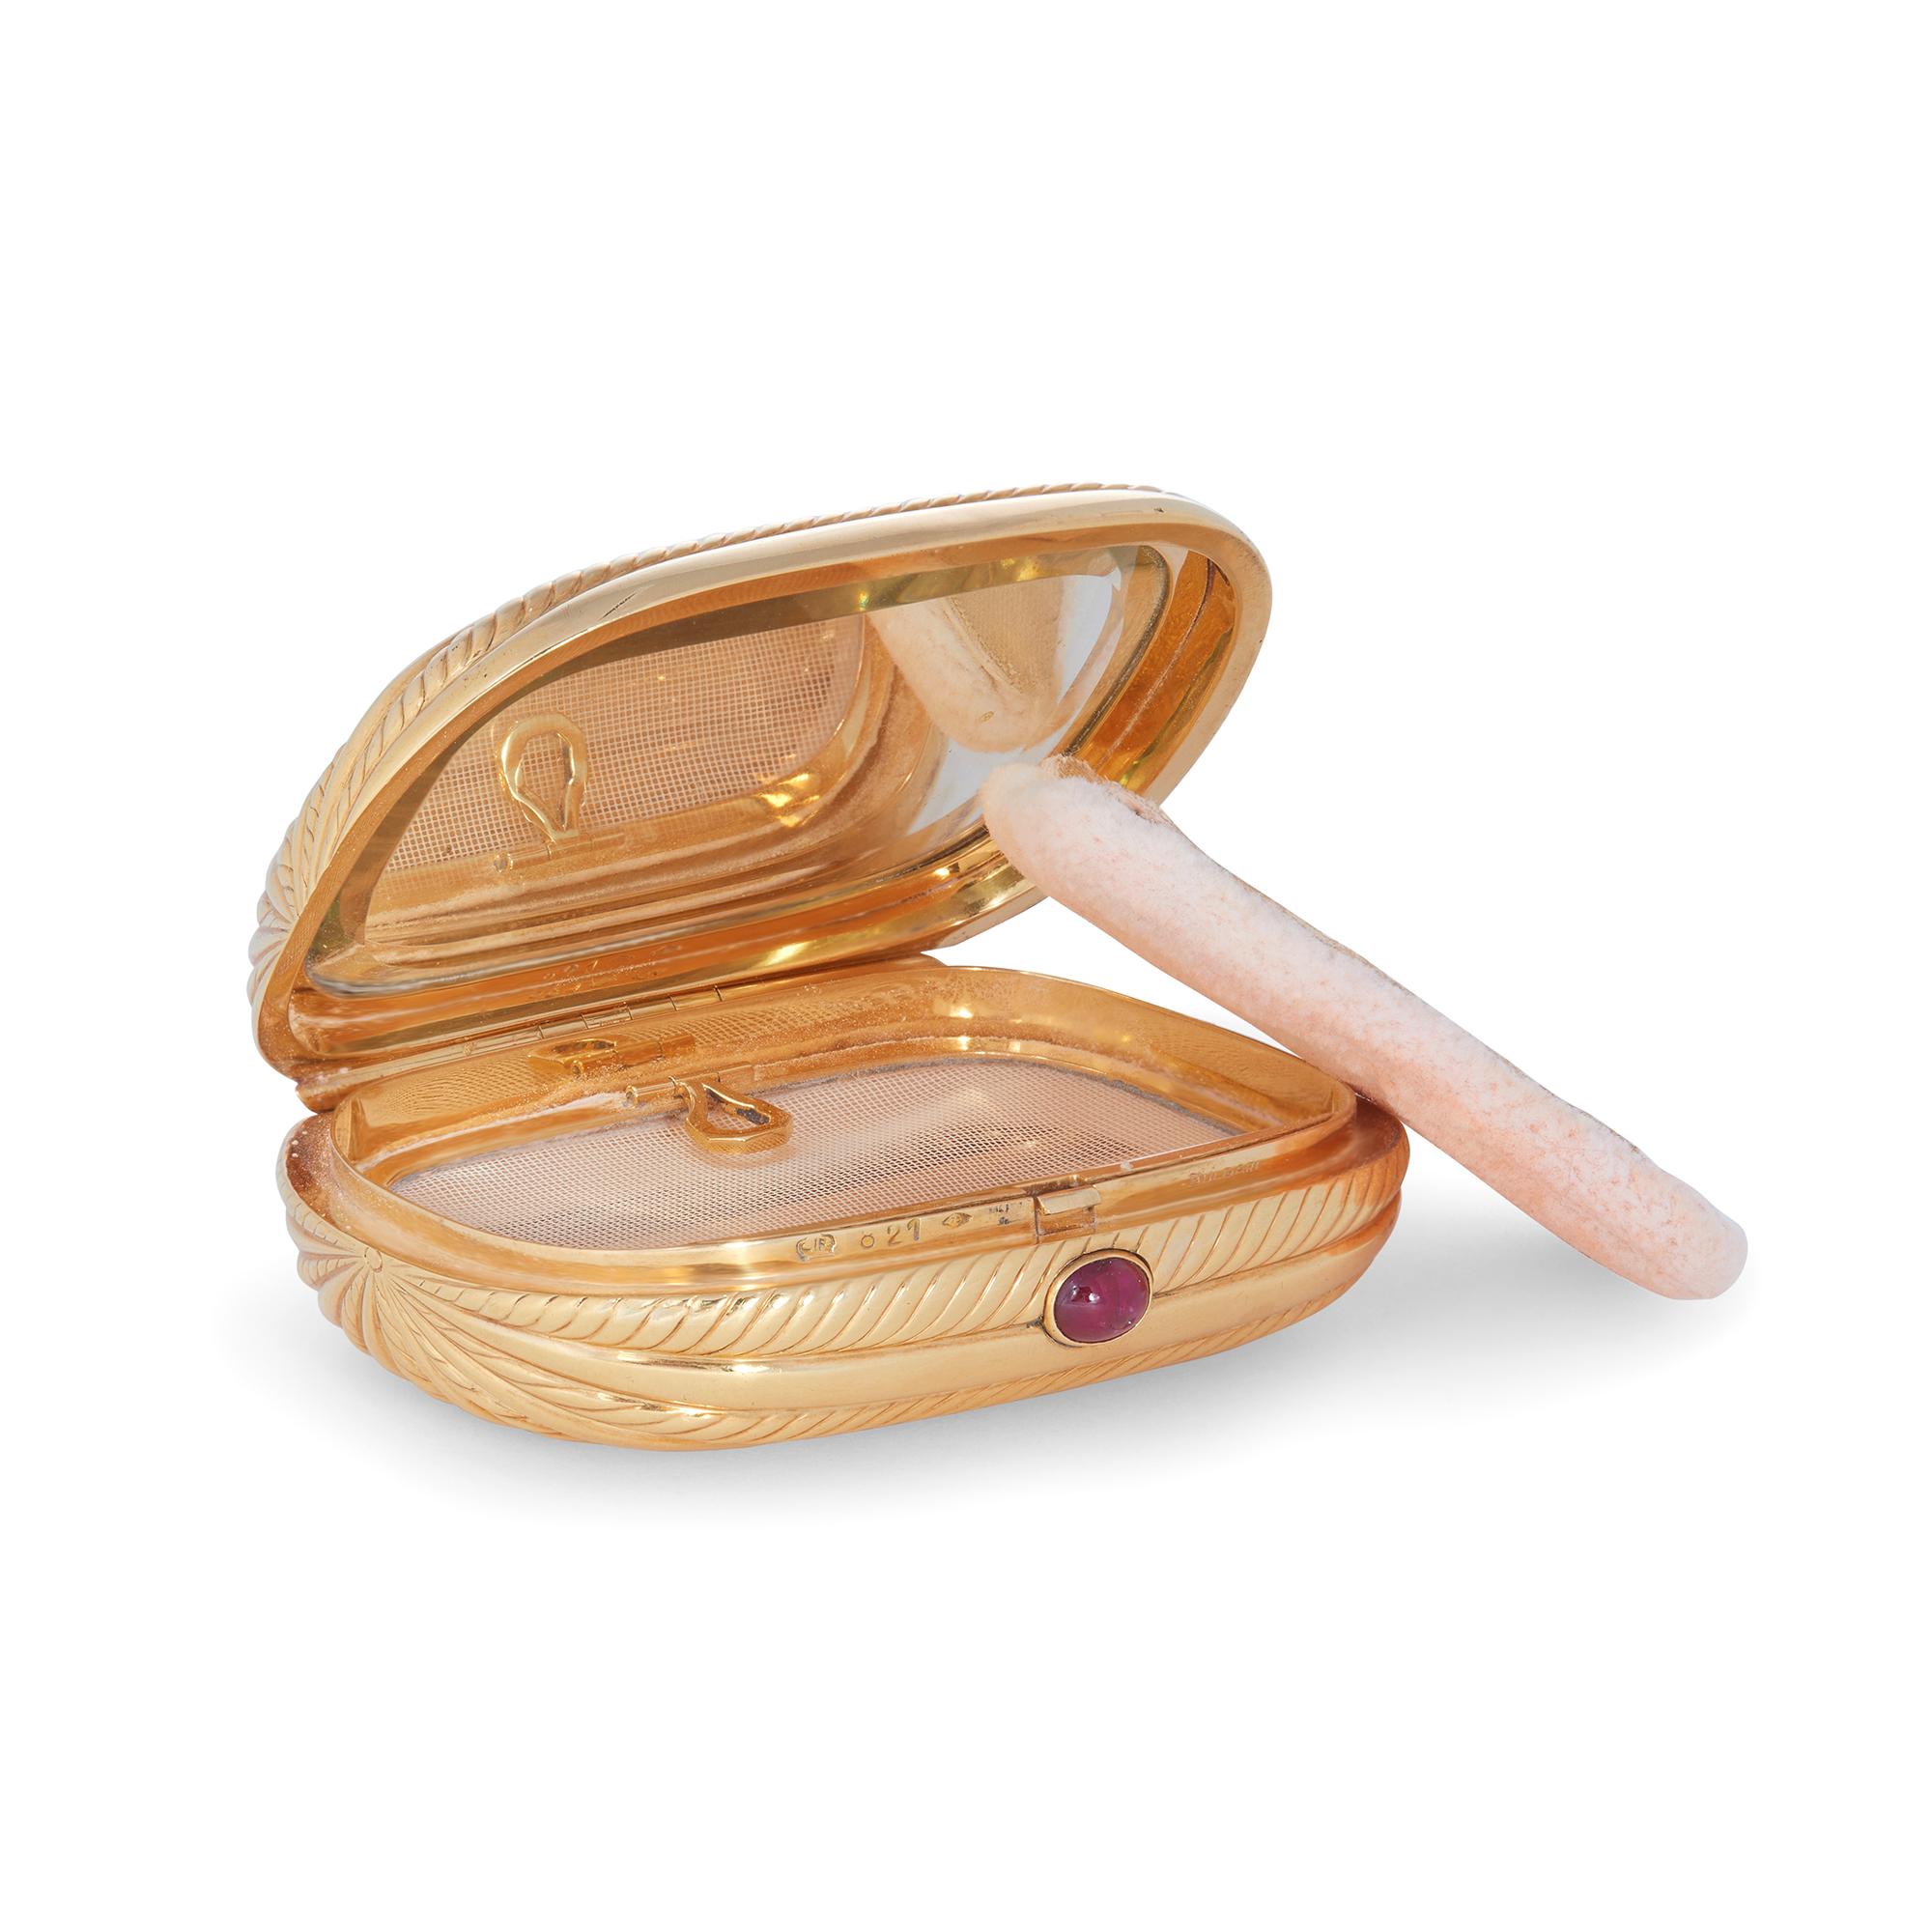 Authentic Bvlgari compact case crafted in 18 karat yellow gold. The cushion-shaped clamshell case features an elegant design of fluted gold rows with a cabochon ruby clasp.  The case measures 3.14 inches x 2.41 inches and features an interior mirror